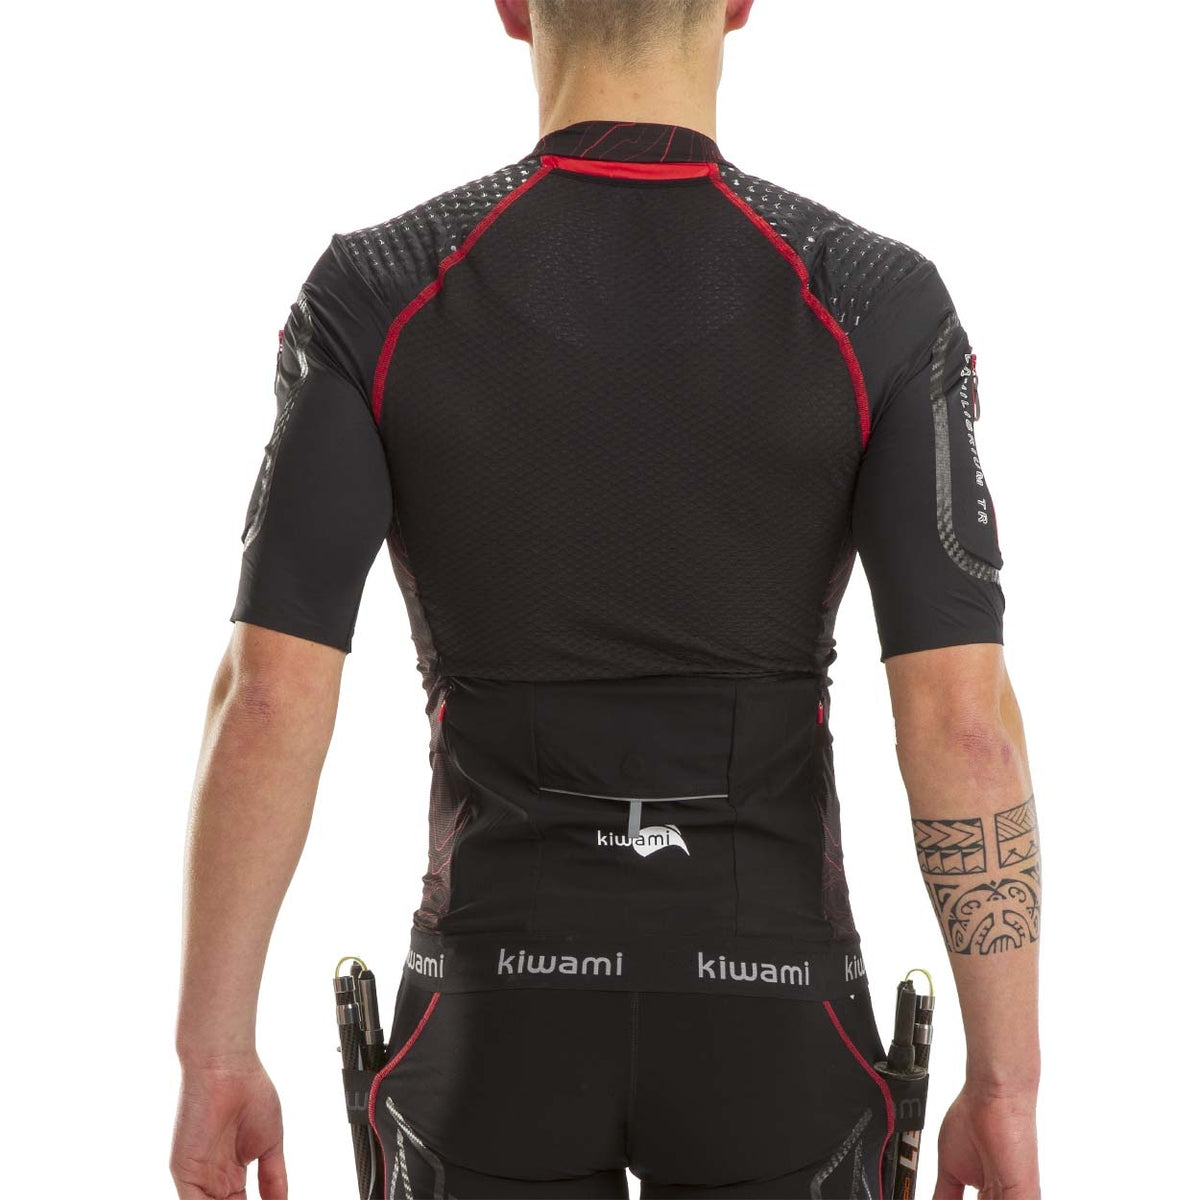 Kiwami Best Trail Running Short with compression pole carrying system